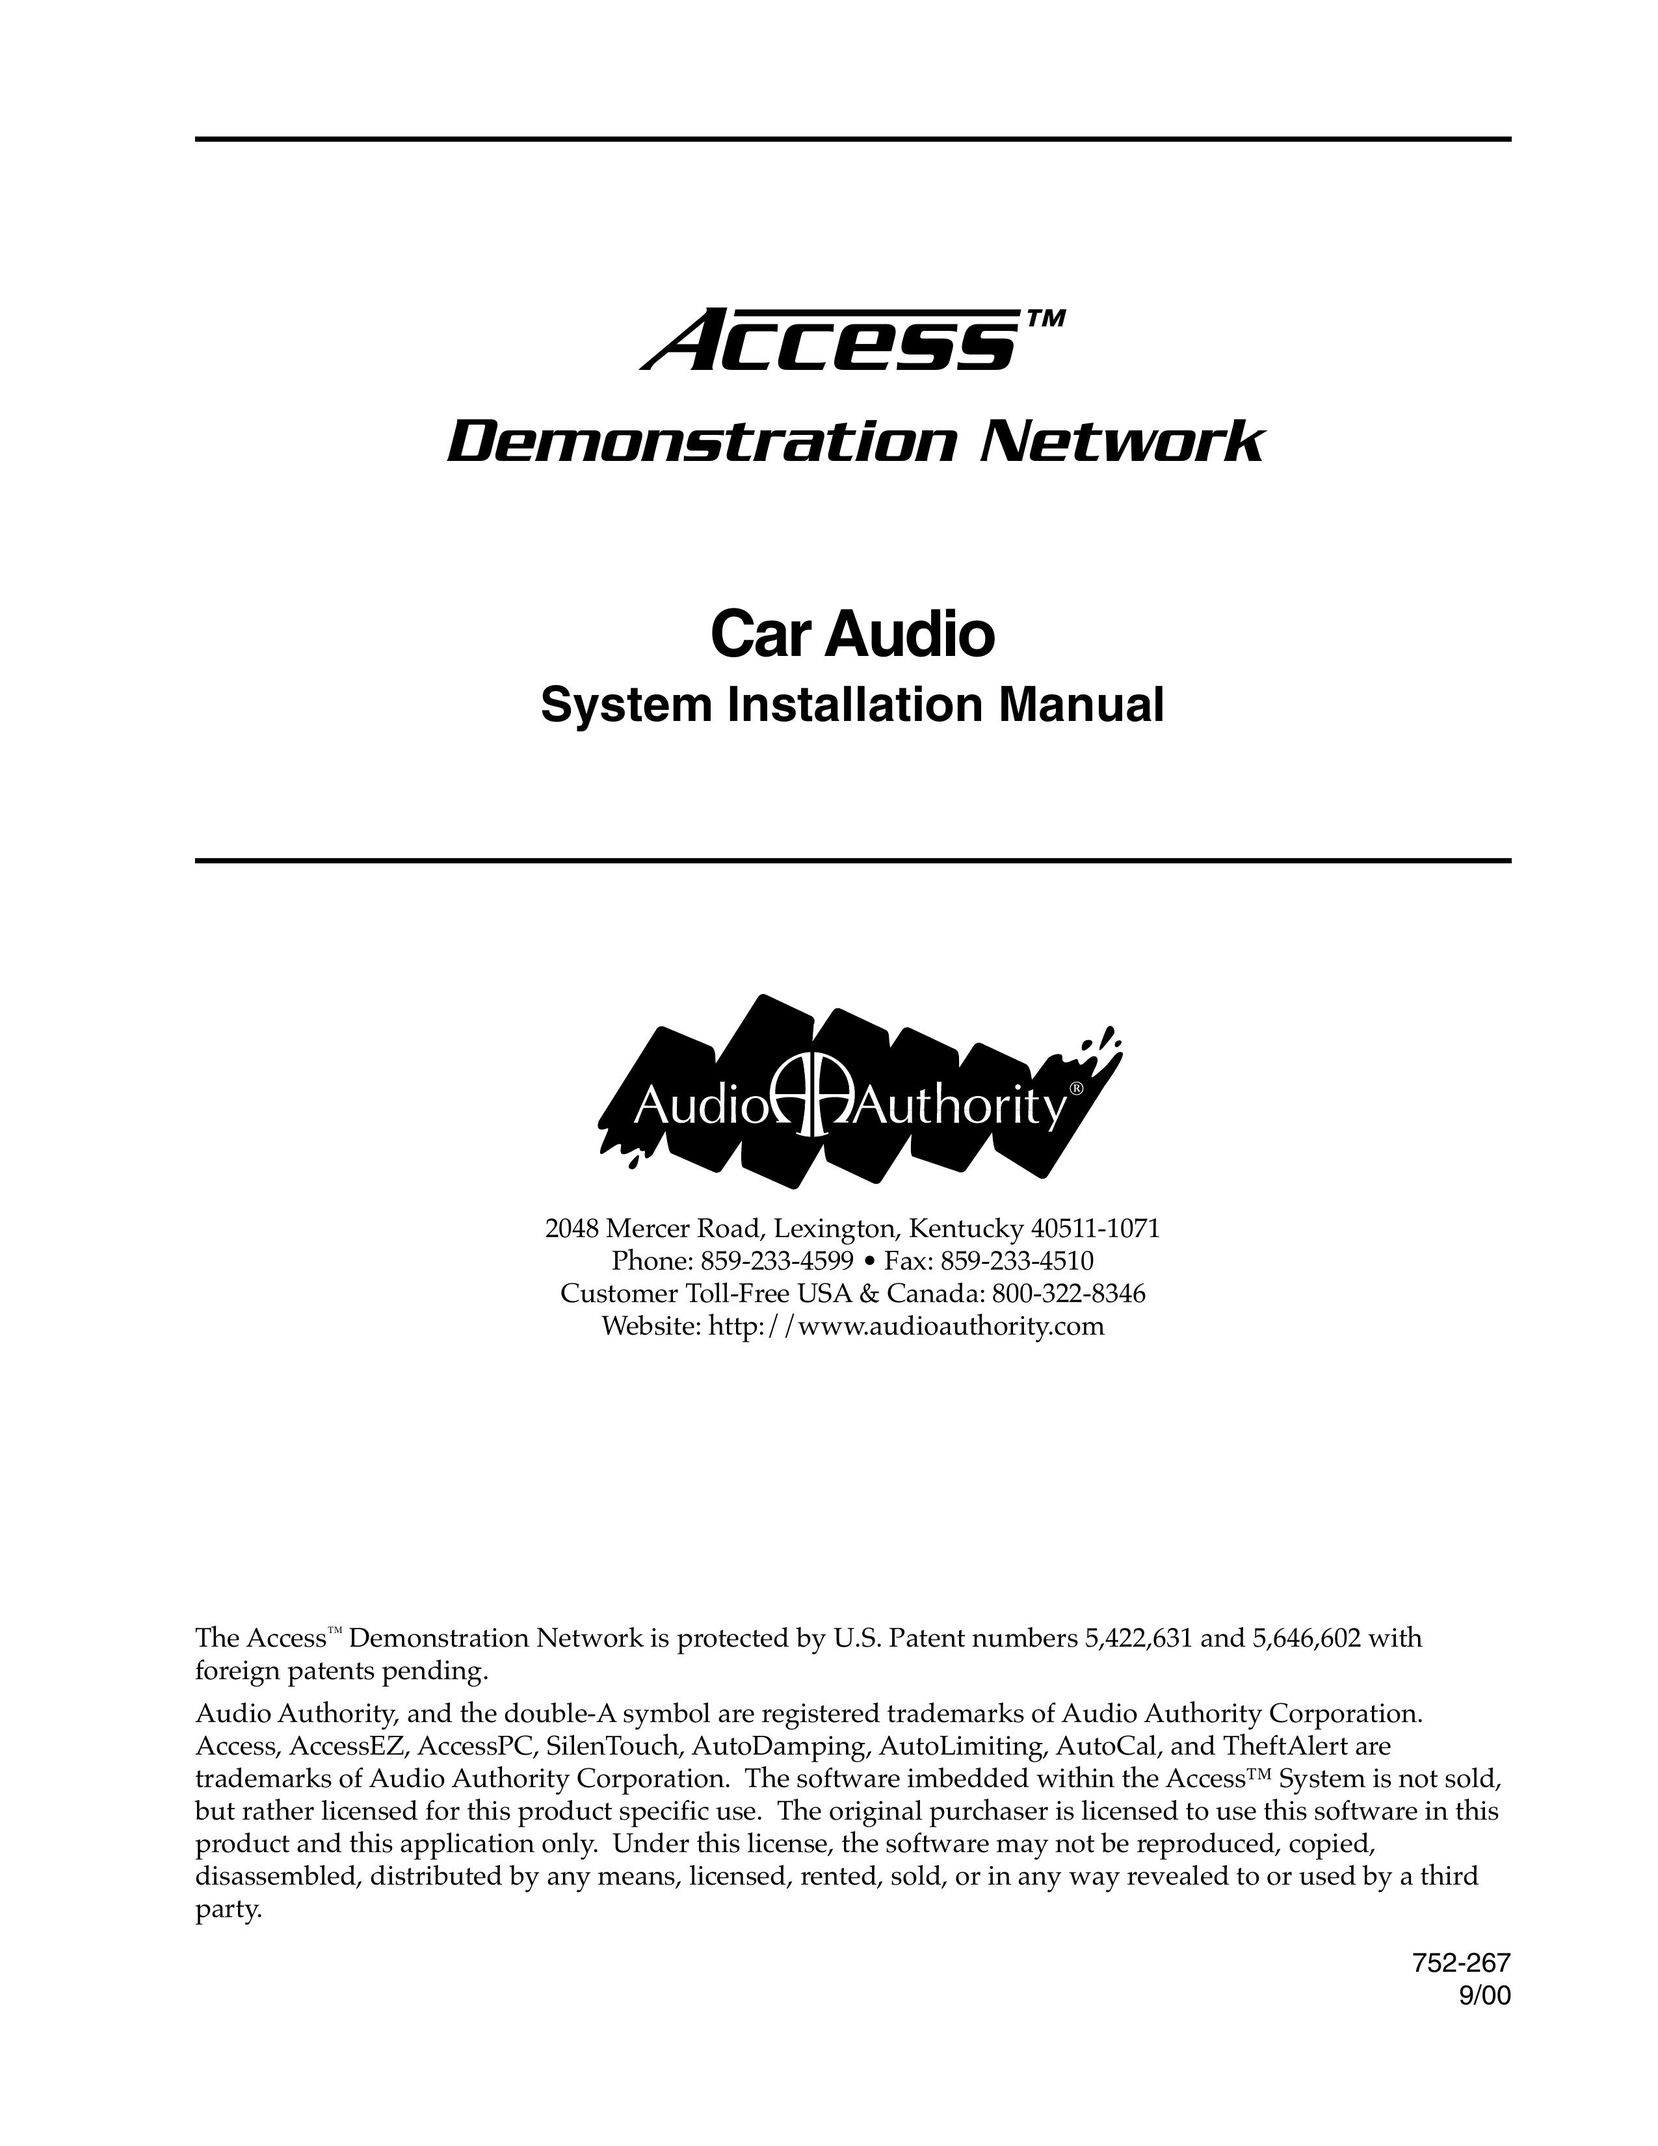 Audio Authority Car Audio System Car Stereo System User Manual